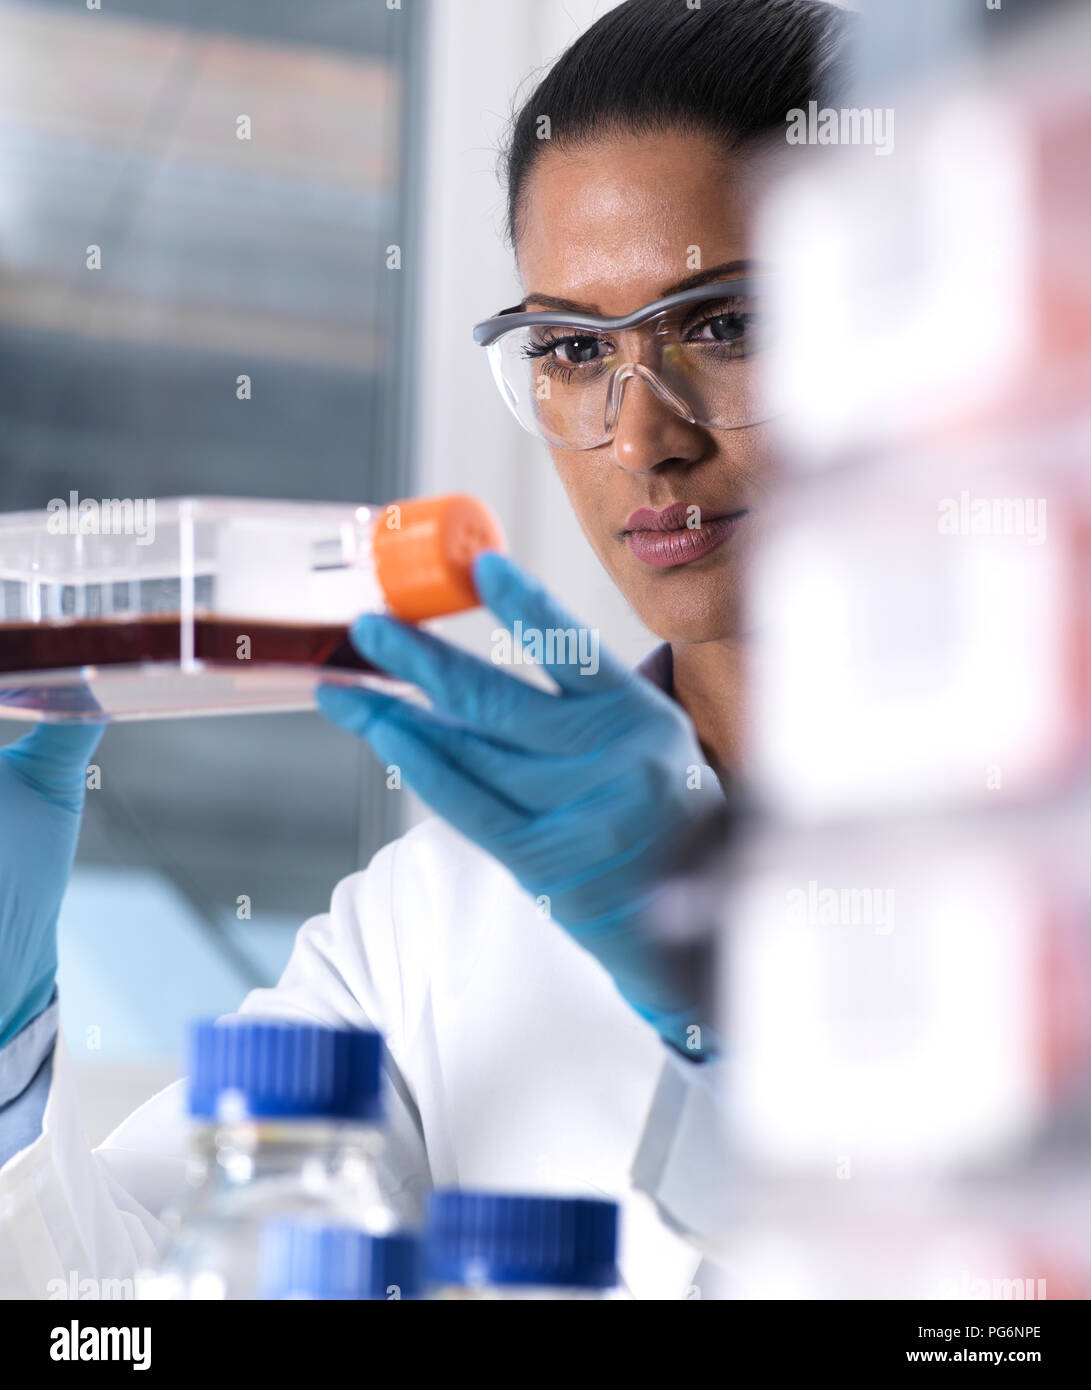 Biomedical Research, female scientist viewing stem cells developing in a culture jar during an experiment in the laboratory Stock Photo